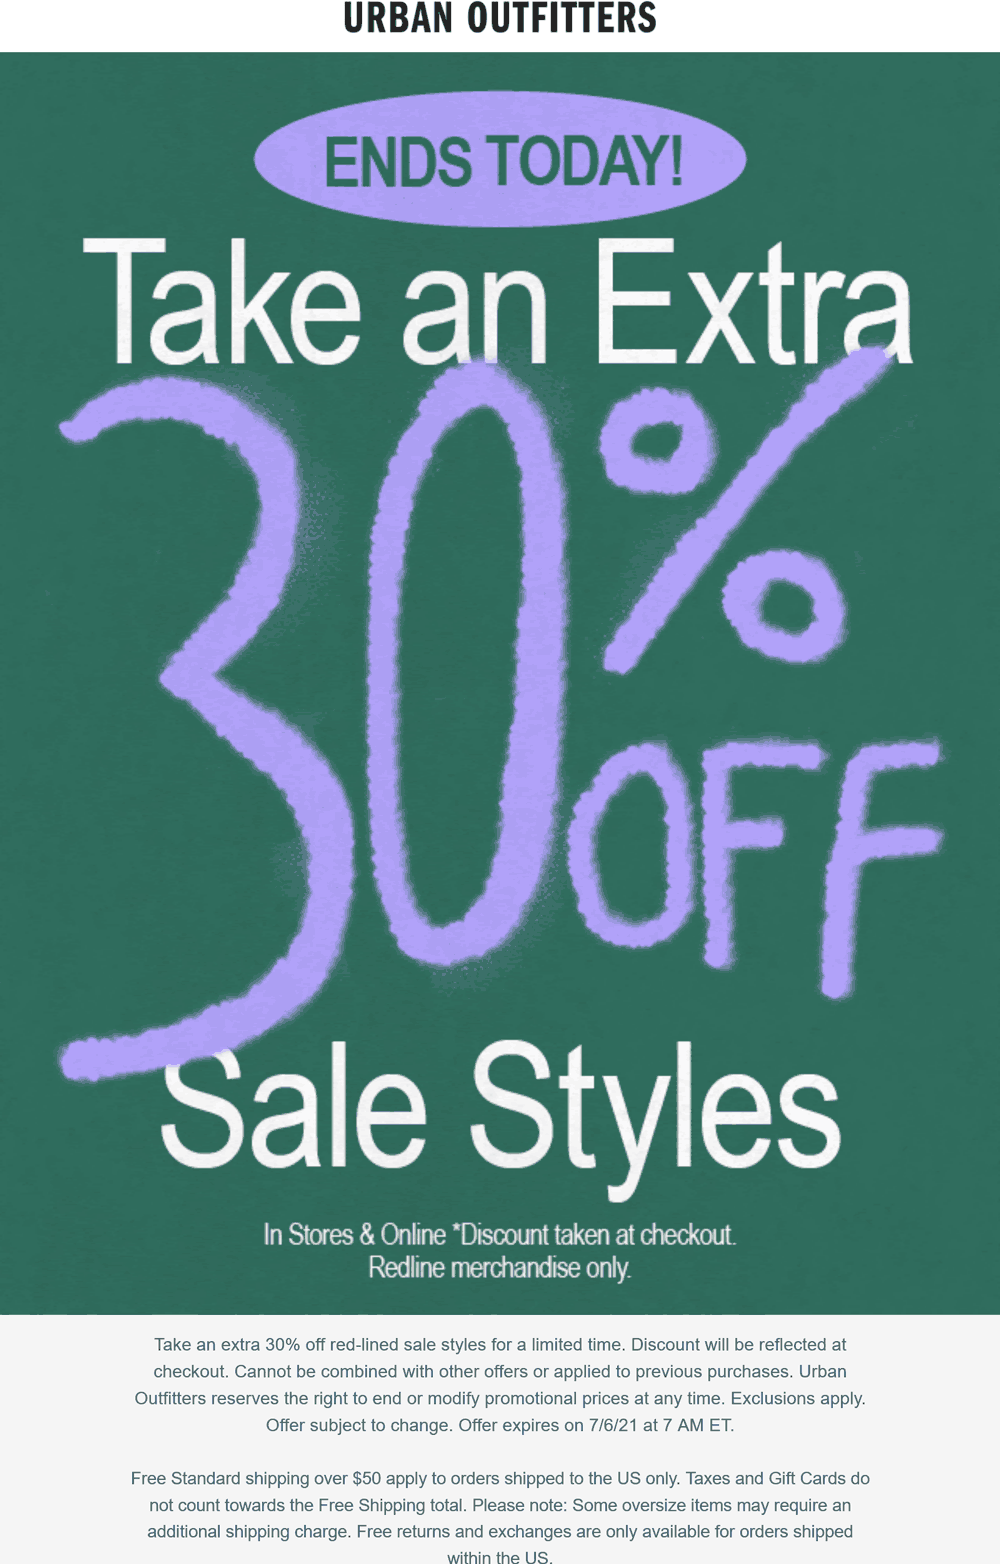 Urban Outfitters stores Coupon  Extra 30% off sale items today at Urban Outfitters, ditto online #urbanoutfitters 